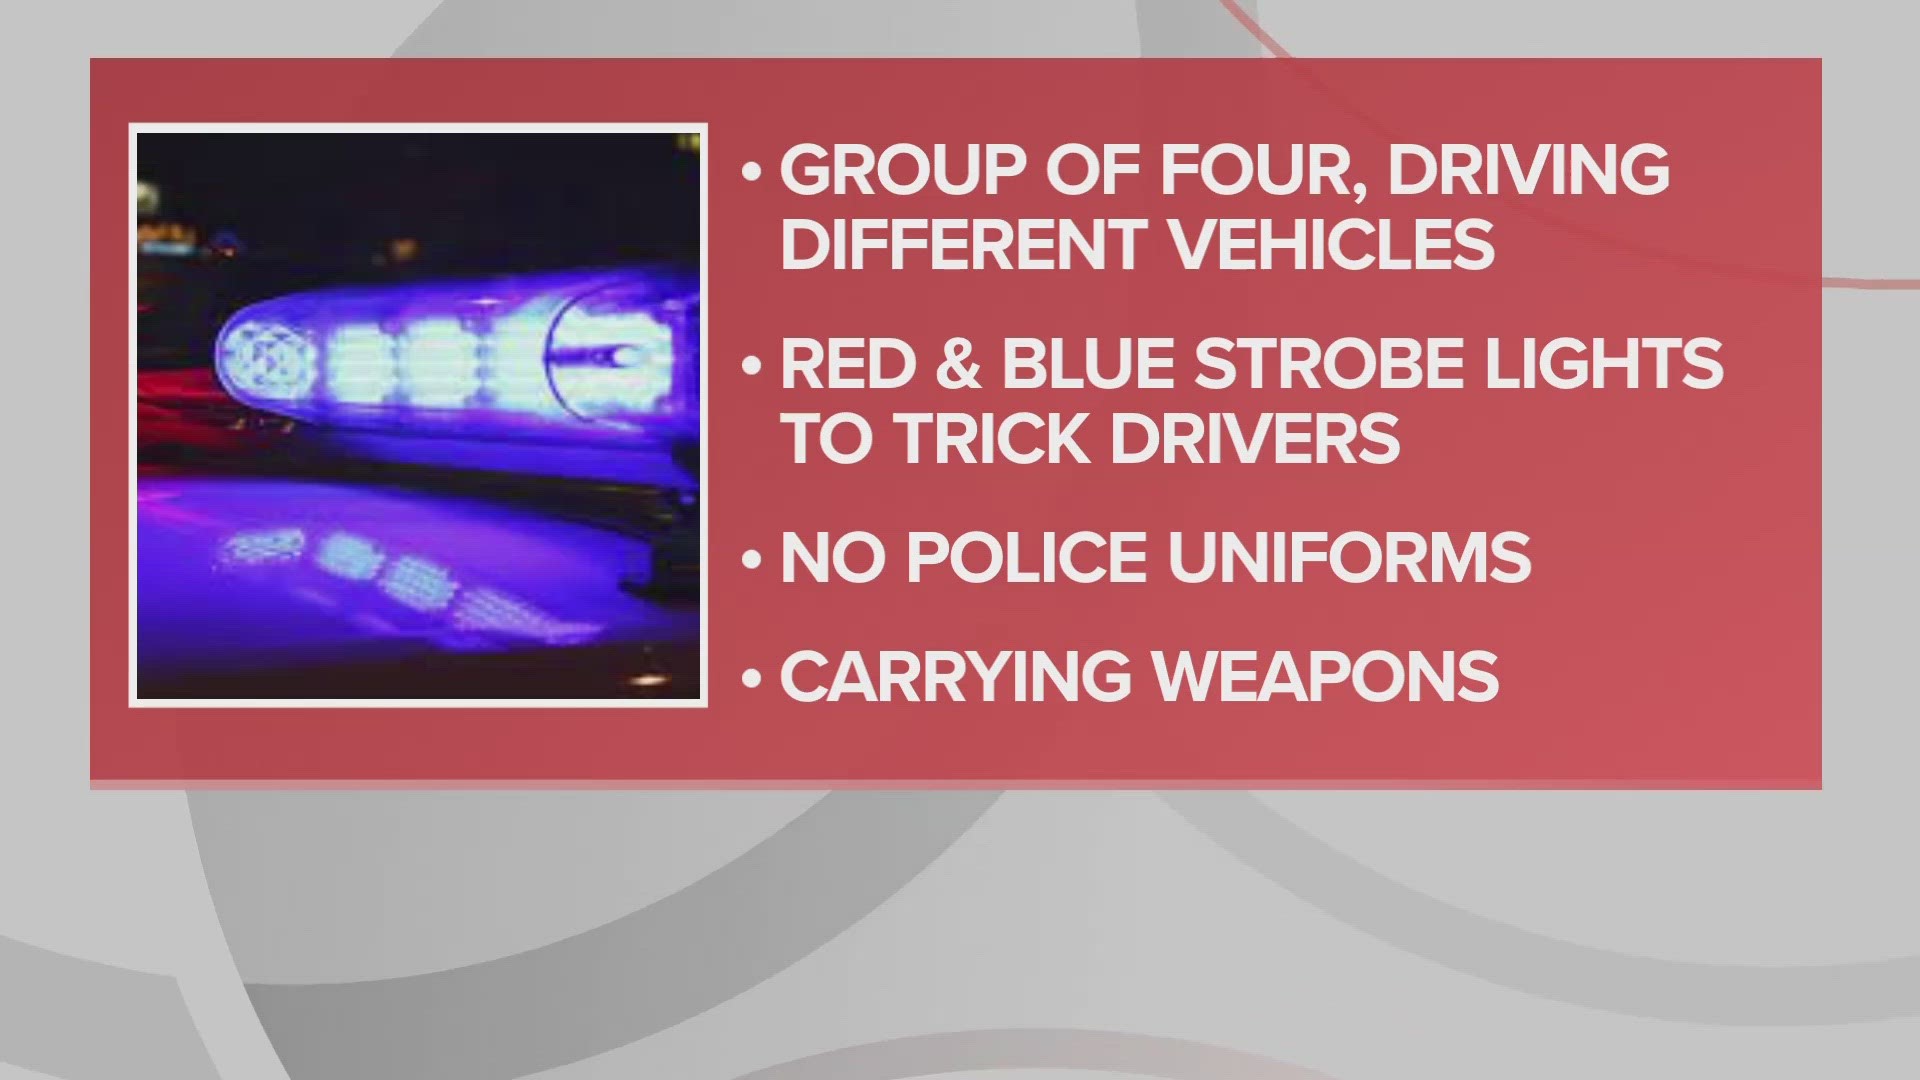 Criminals will use red and blue strobe lights to 'pull over' unsuspecting drivers only to rob them at gun point.